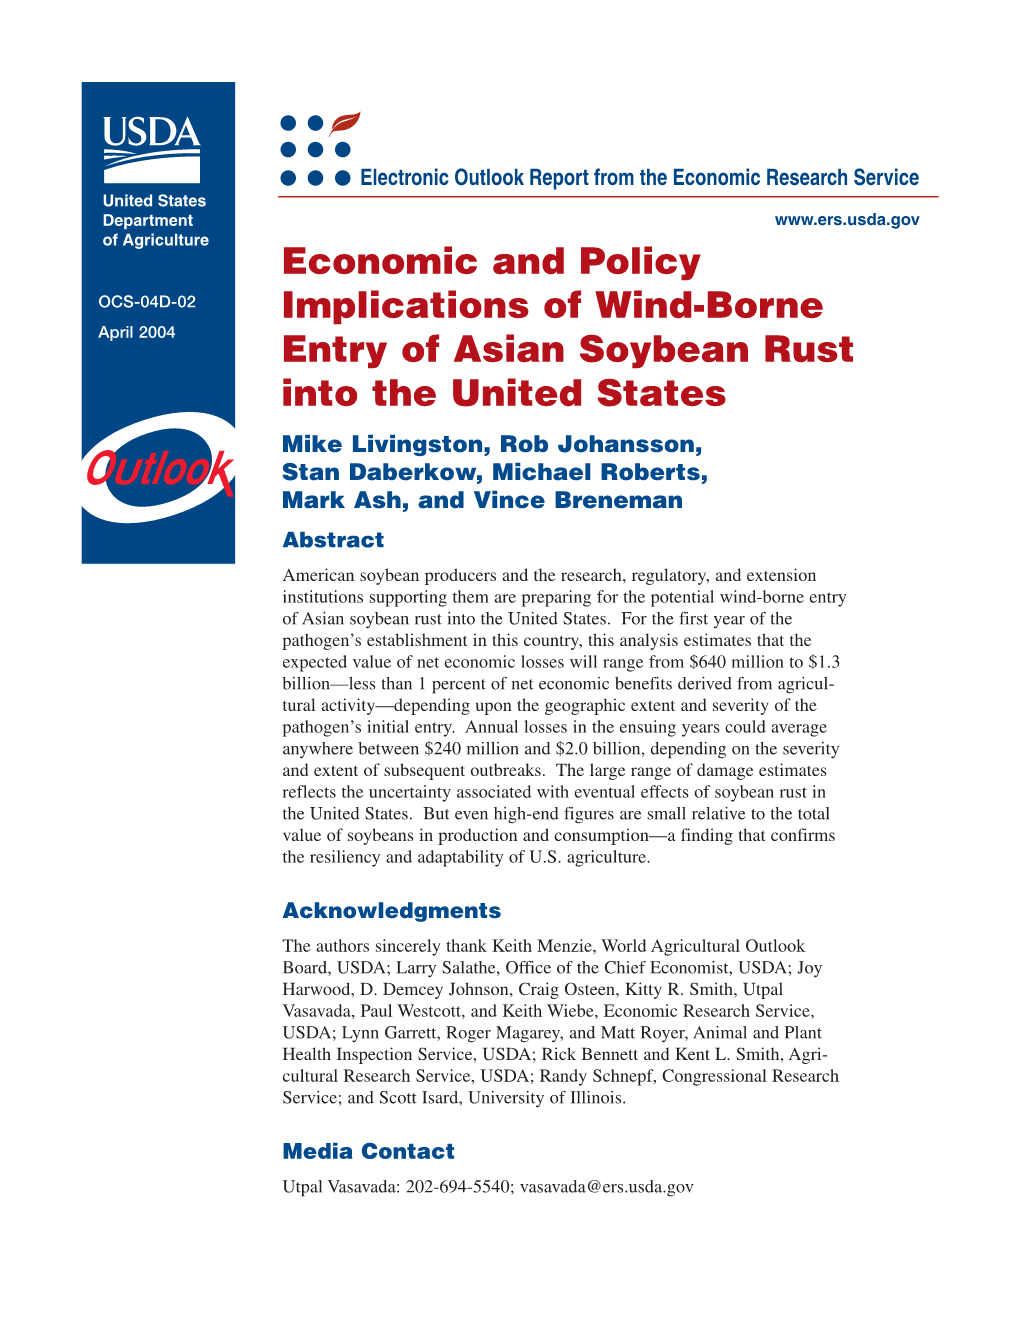 Economic and Policy Implications of Wind-Borne Entry of Asian Soybean